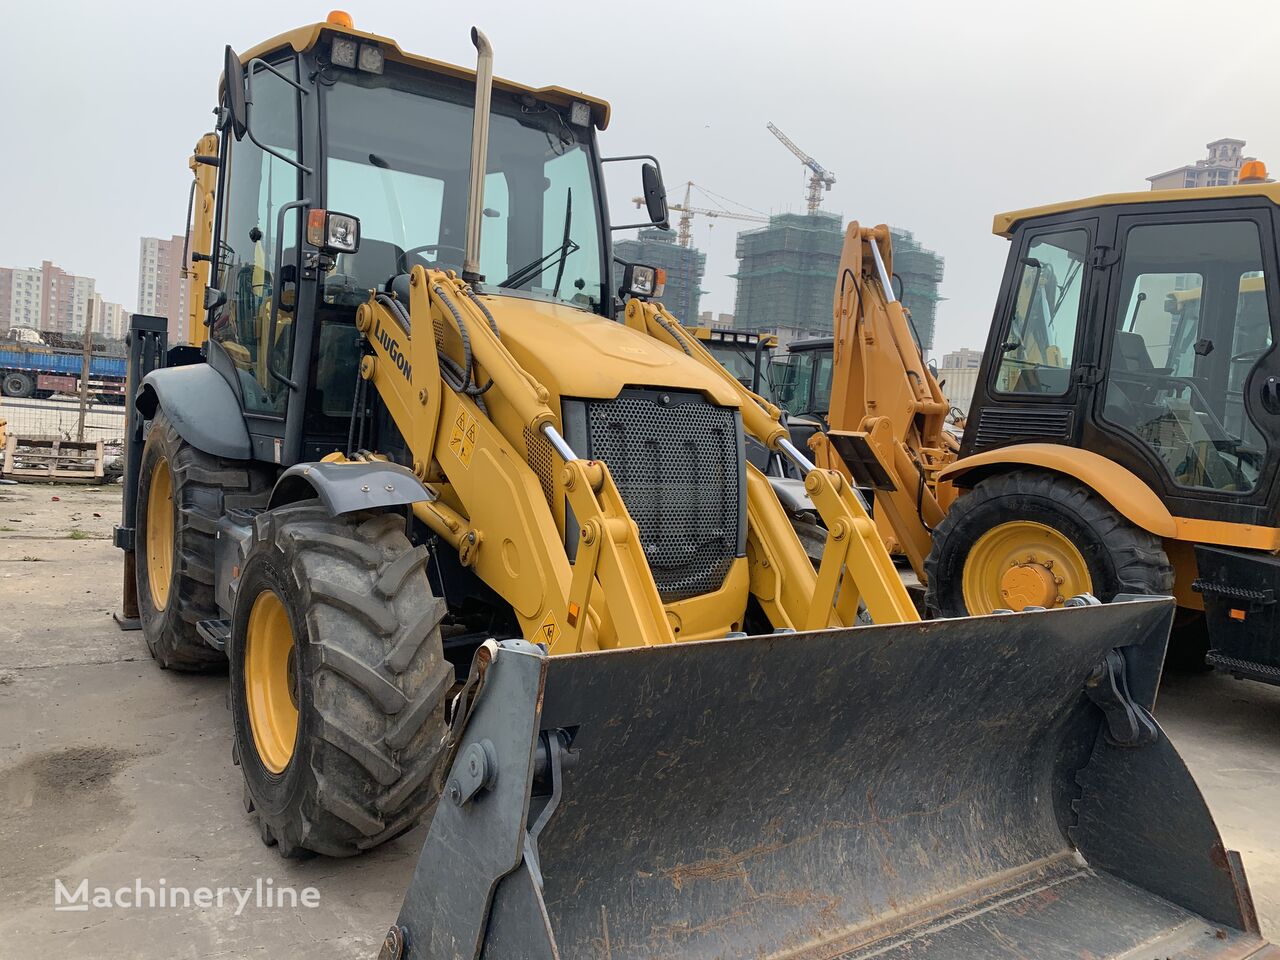 LiuGong CLG777A Backhoe Loader Used Construction Machinery